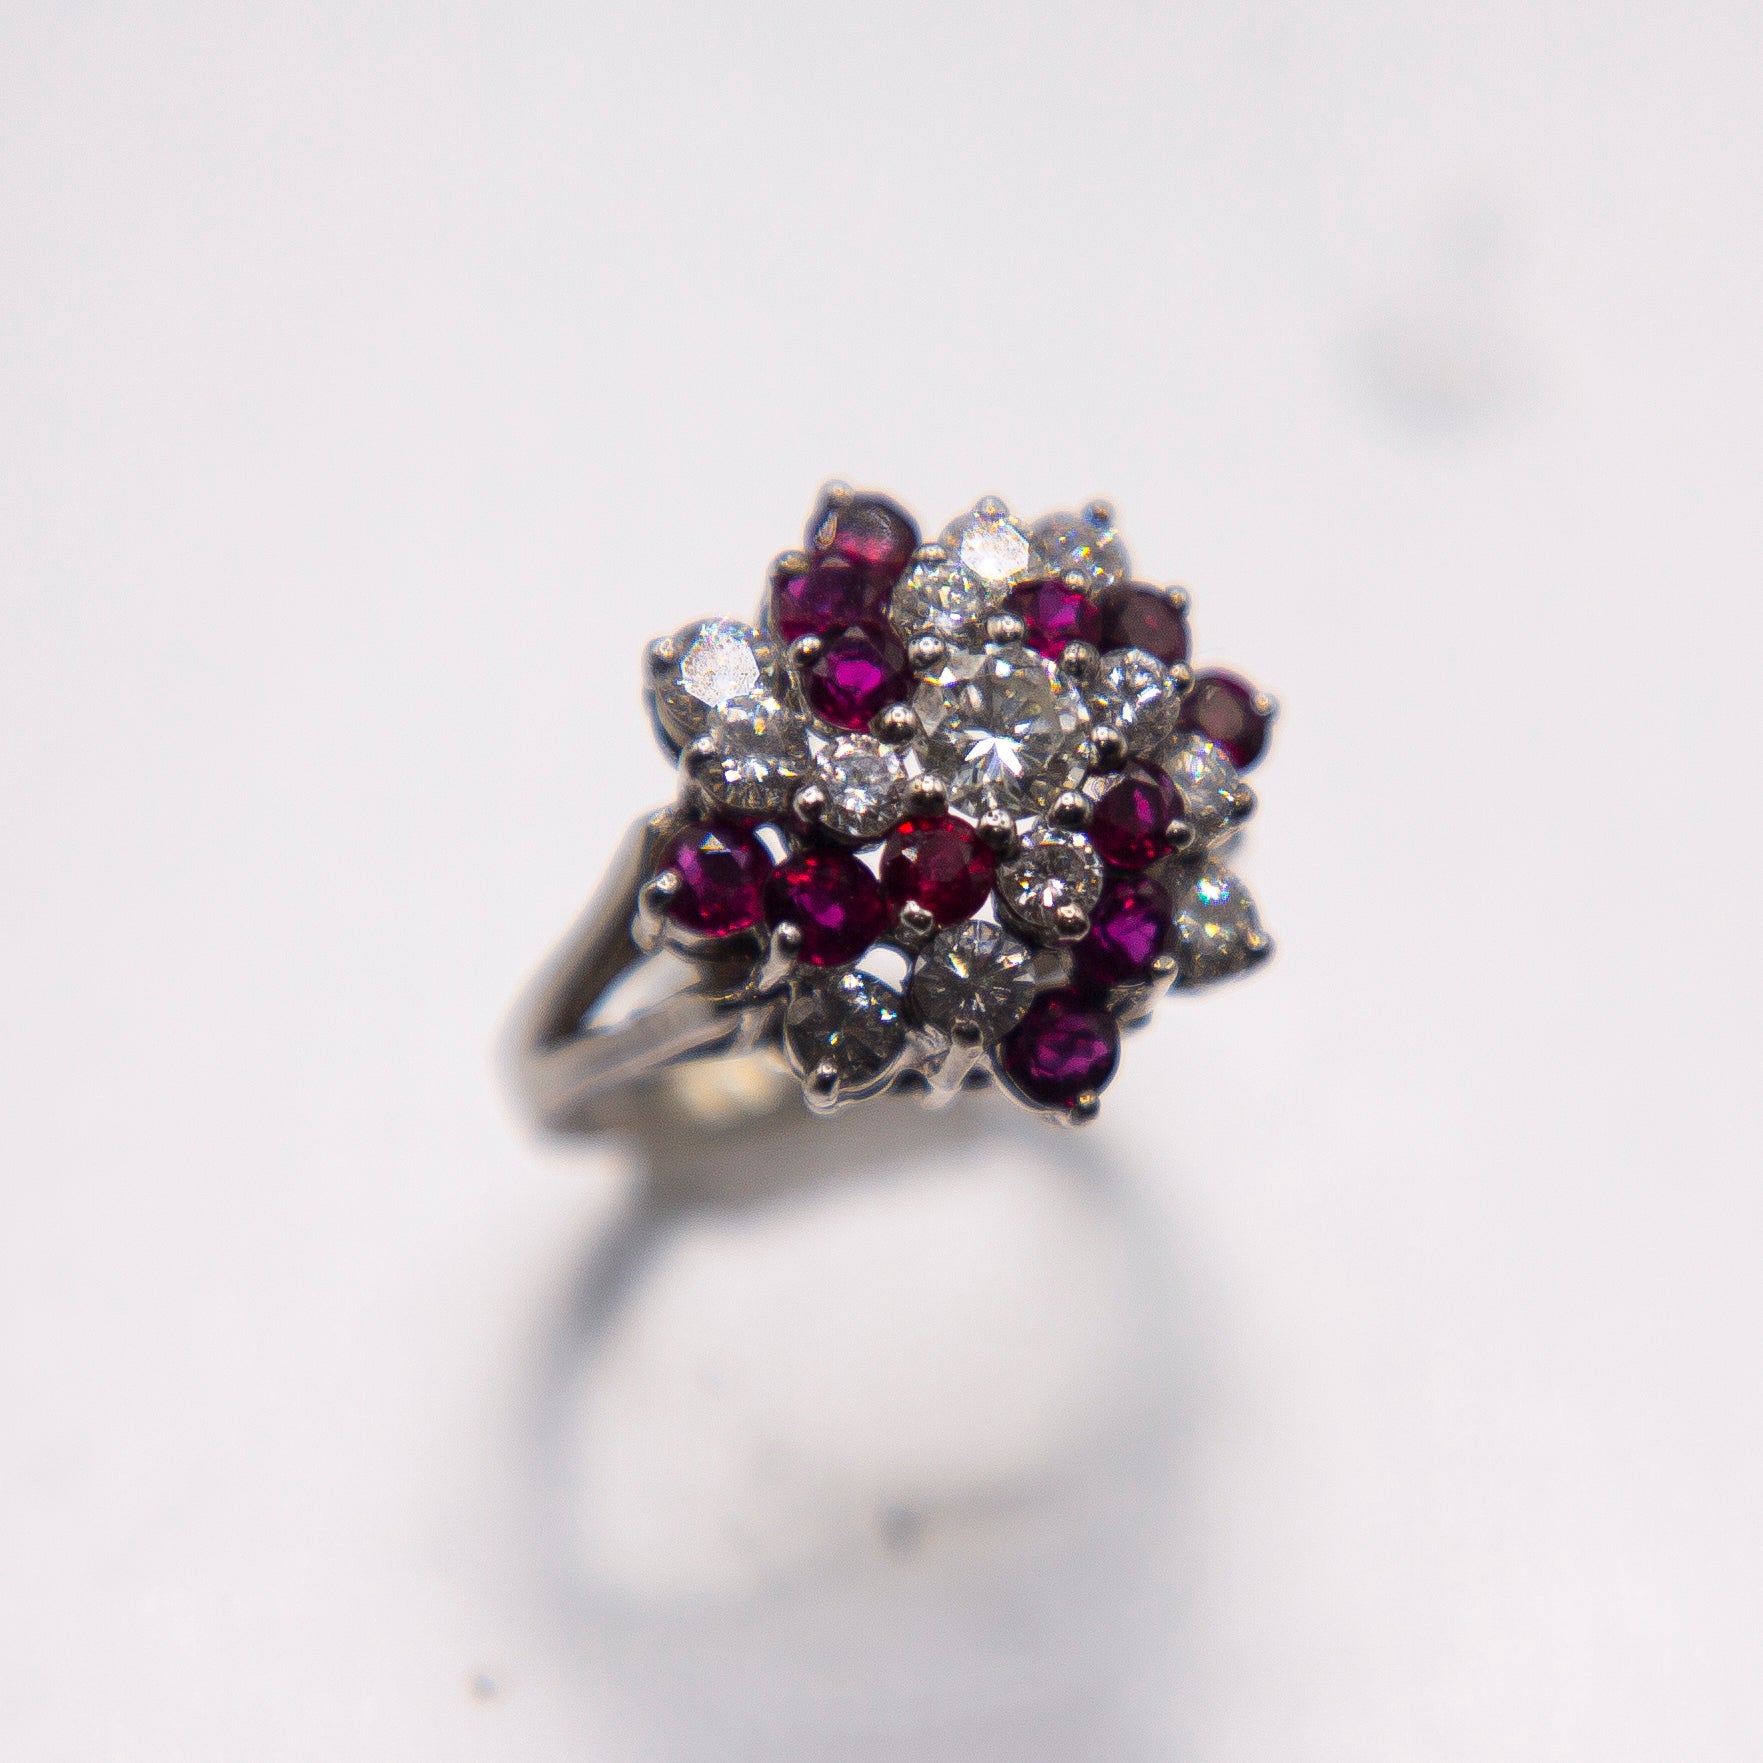 The classic pinwheel style cluster features superbly matched intense ,transparent red marquise rubies weighing 2.50 carats set amongst top collection color fine diamonds. From a Venice FL estate, the ring is in impeccable shape, circa 1970,